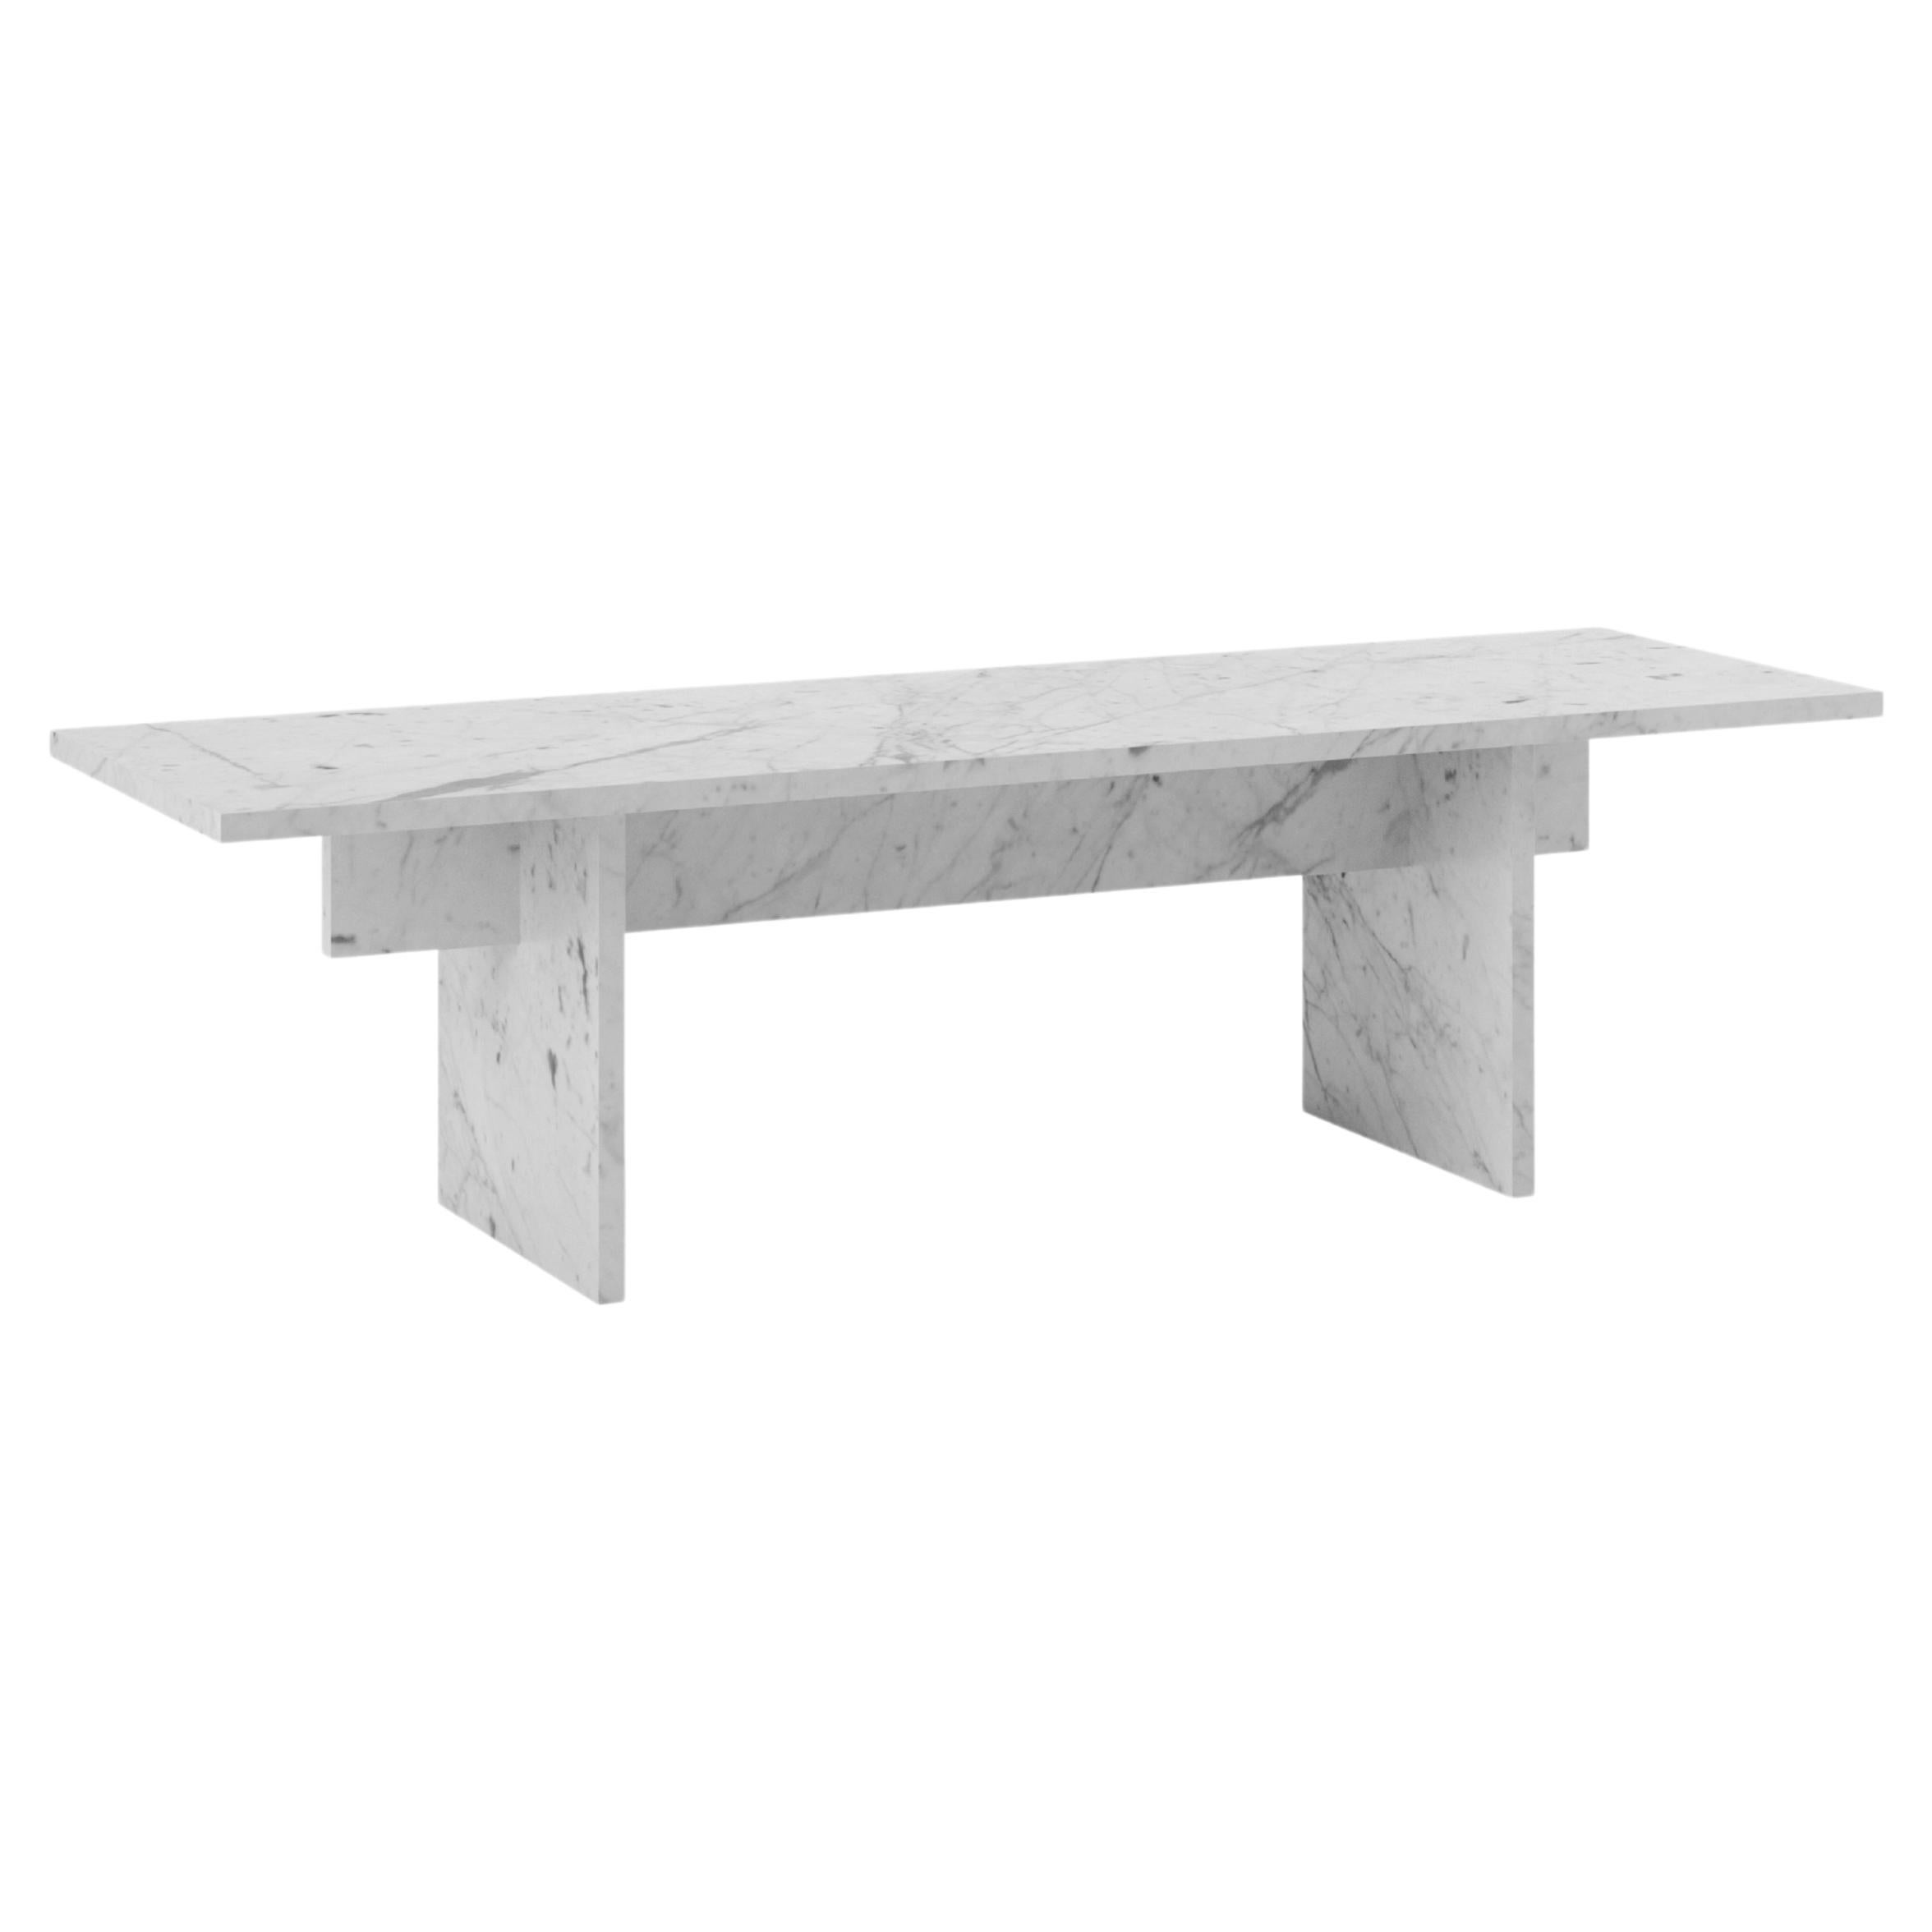 Vondel Coffee Table/Bench Handcrafted in Honed Bianco Carrara Marble